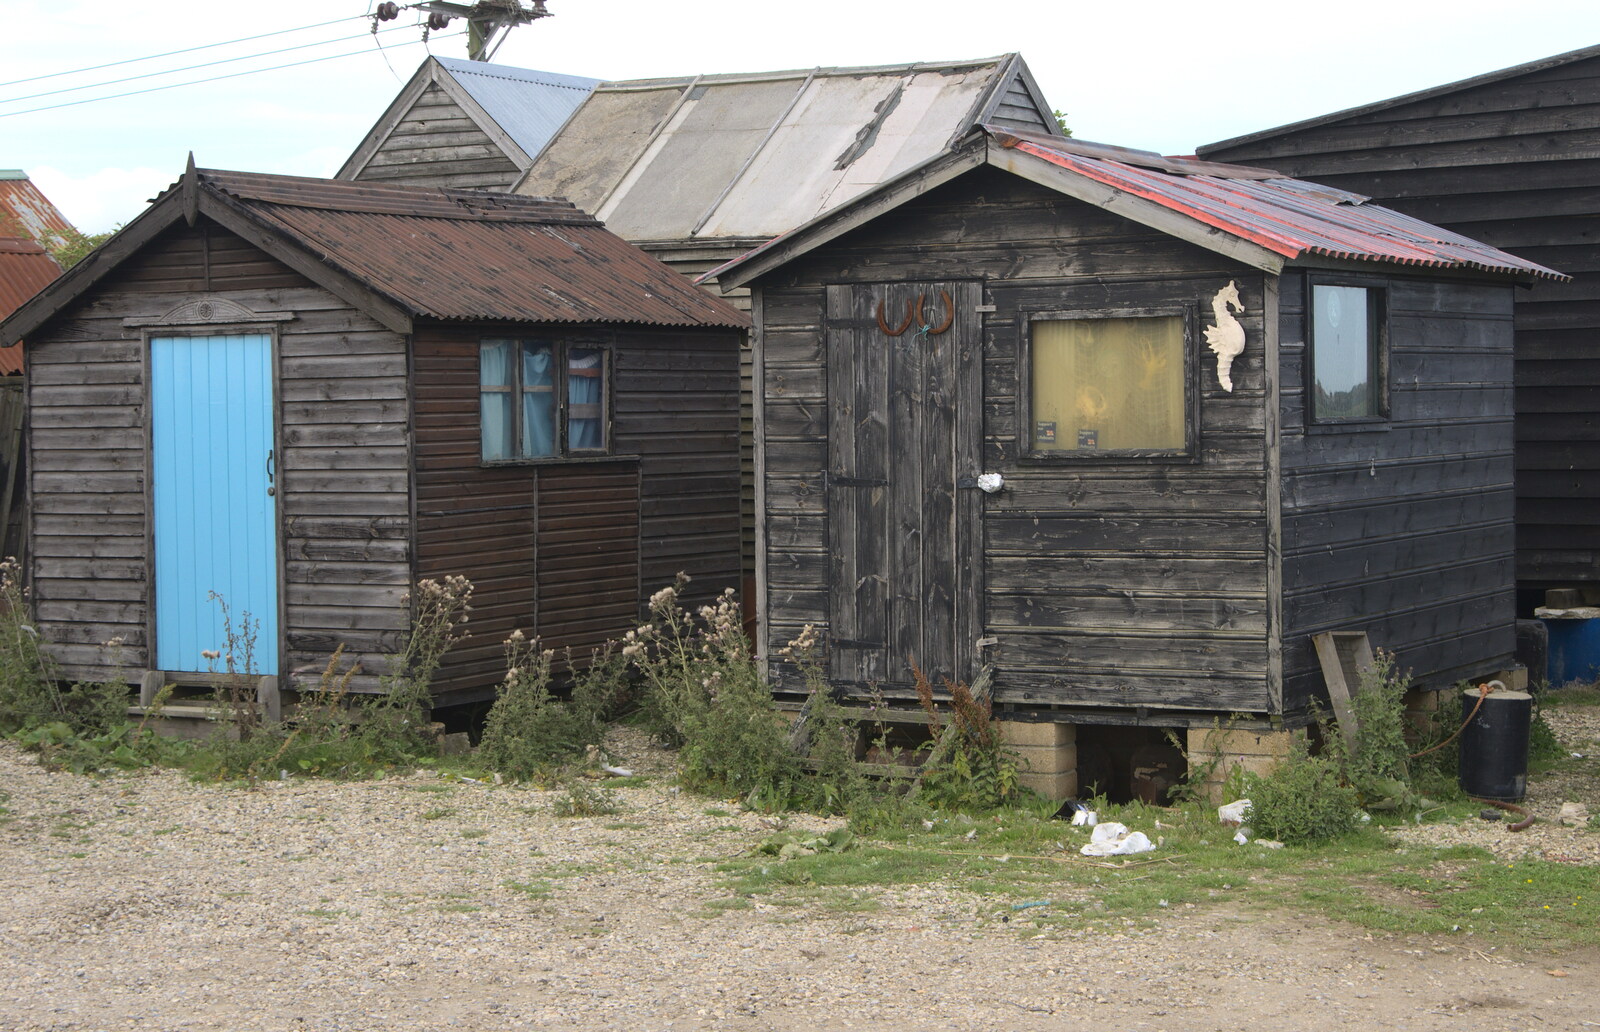 More fishermen's huts from The Danger of Trees: A Camping (Mis)adventure - Southwold, Suffolk - 3rd August 2015